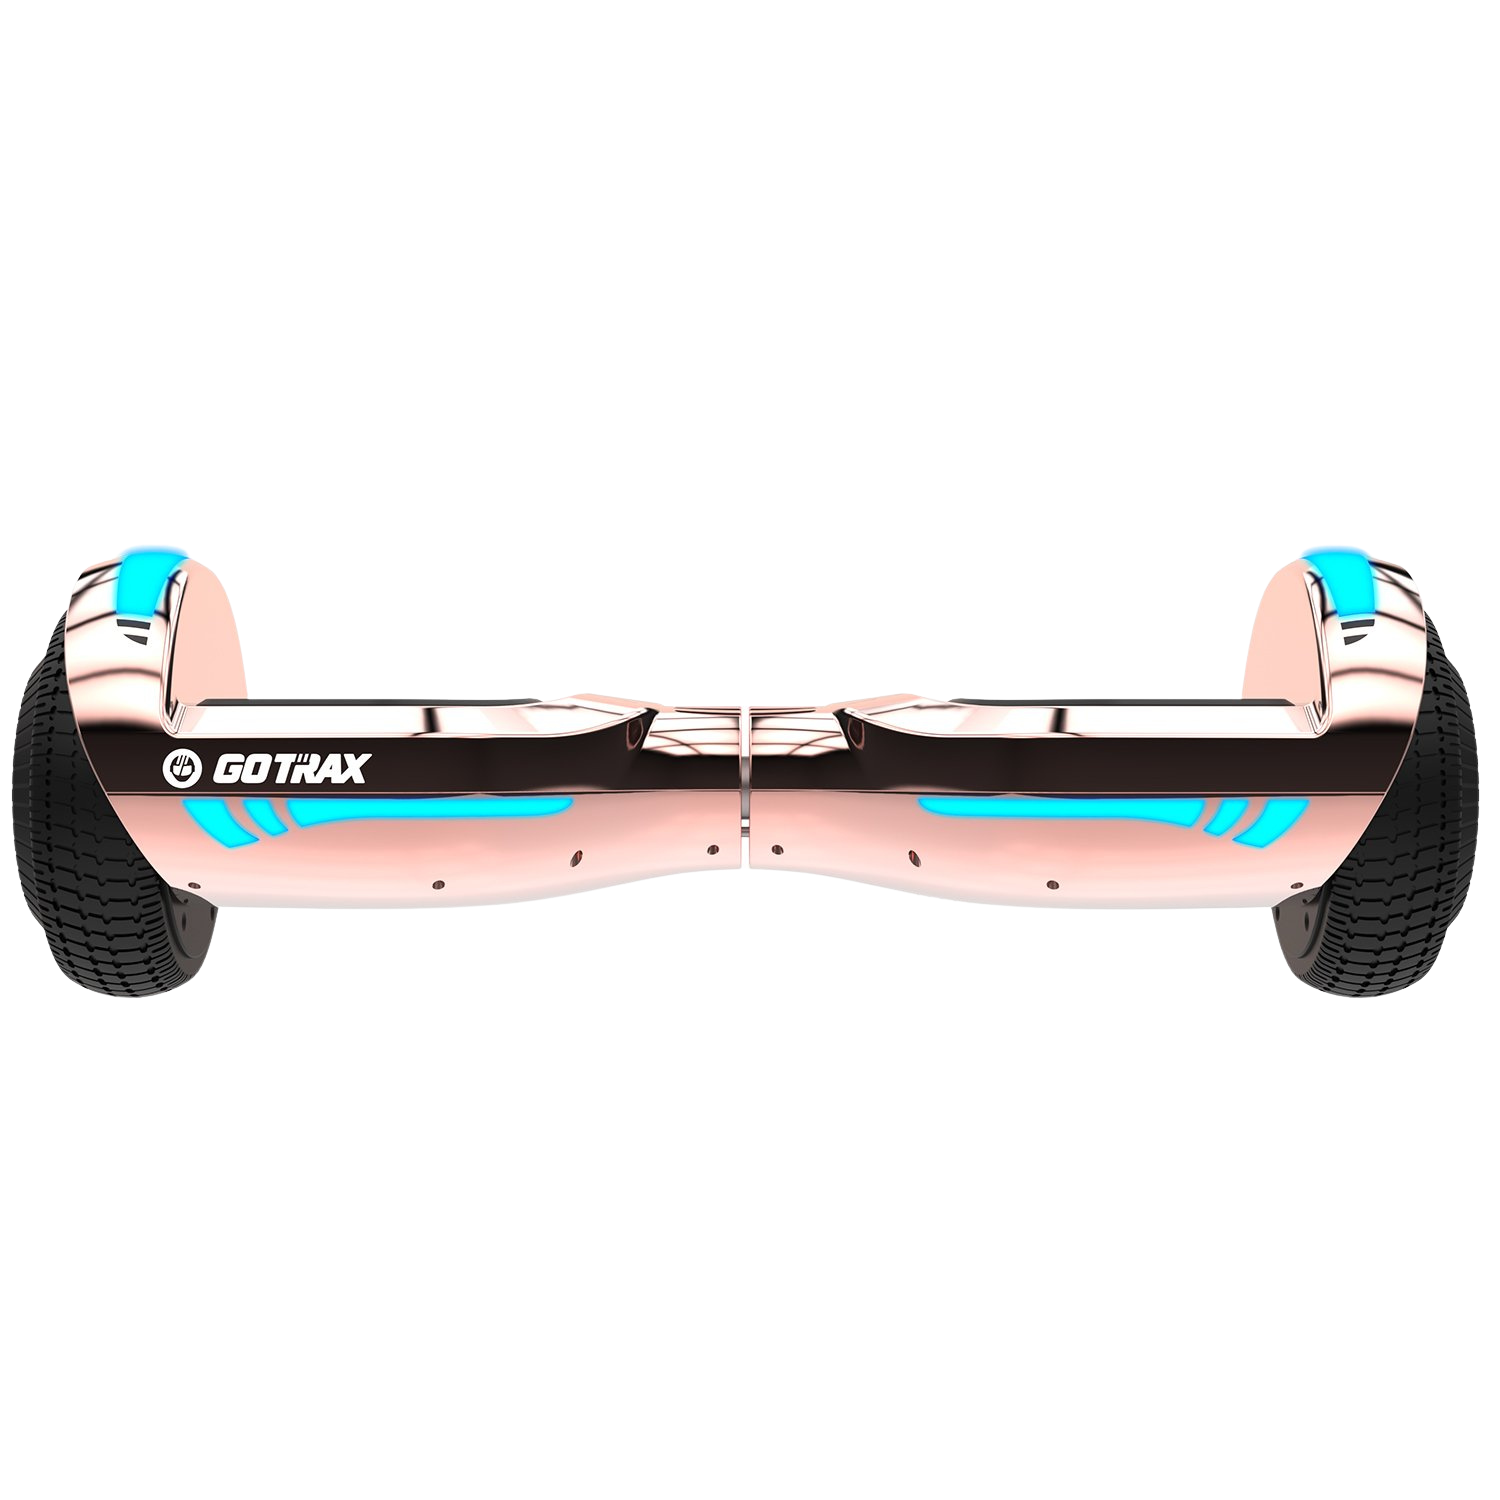 Gotrax Glide Chrome Bluetooth Self Balancing Hoverboard with Bright LED Lighting 6.5"-Max 5KM Range & 10KPH Max Speed